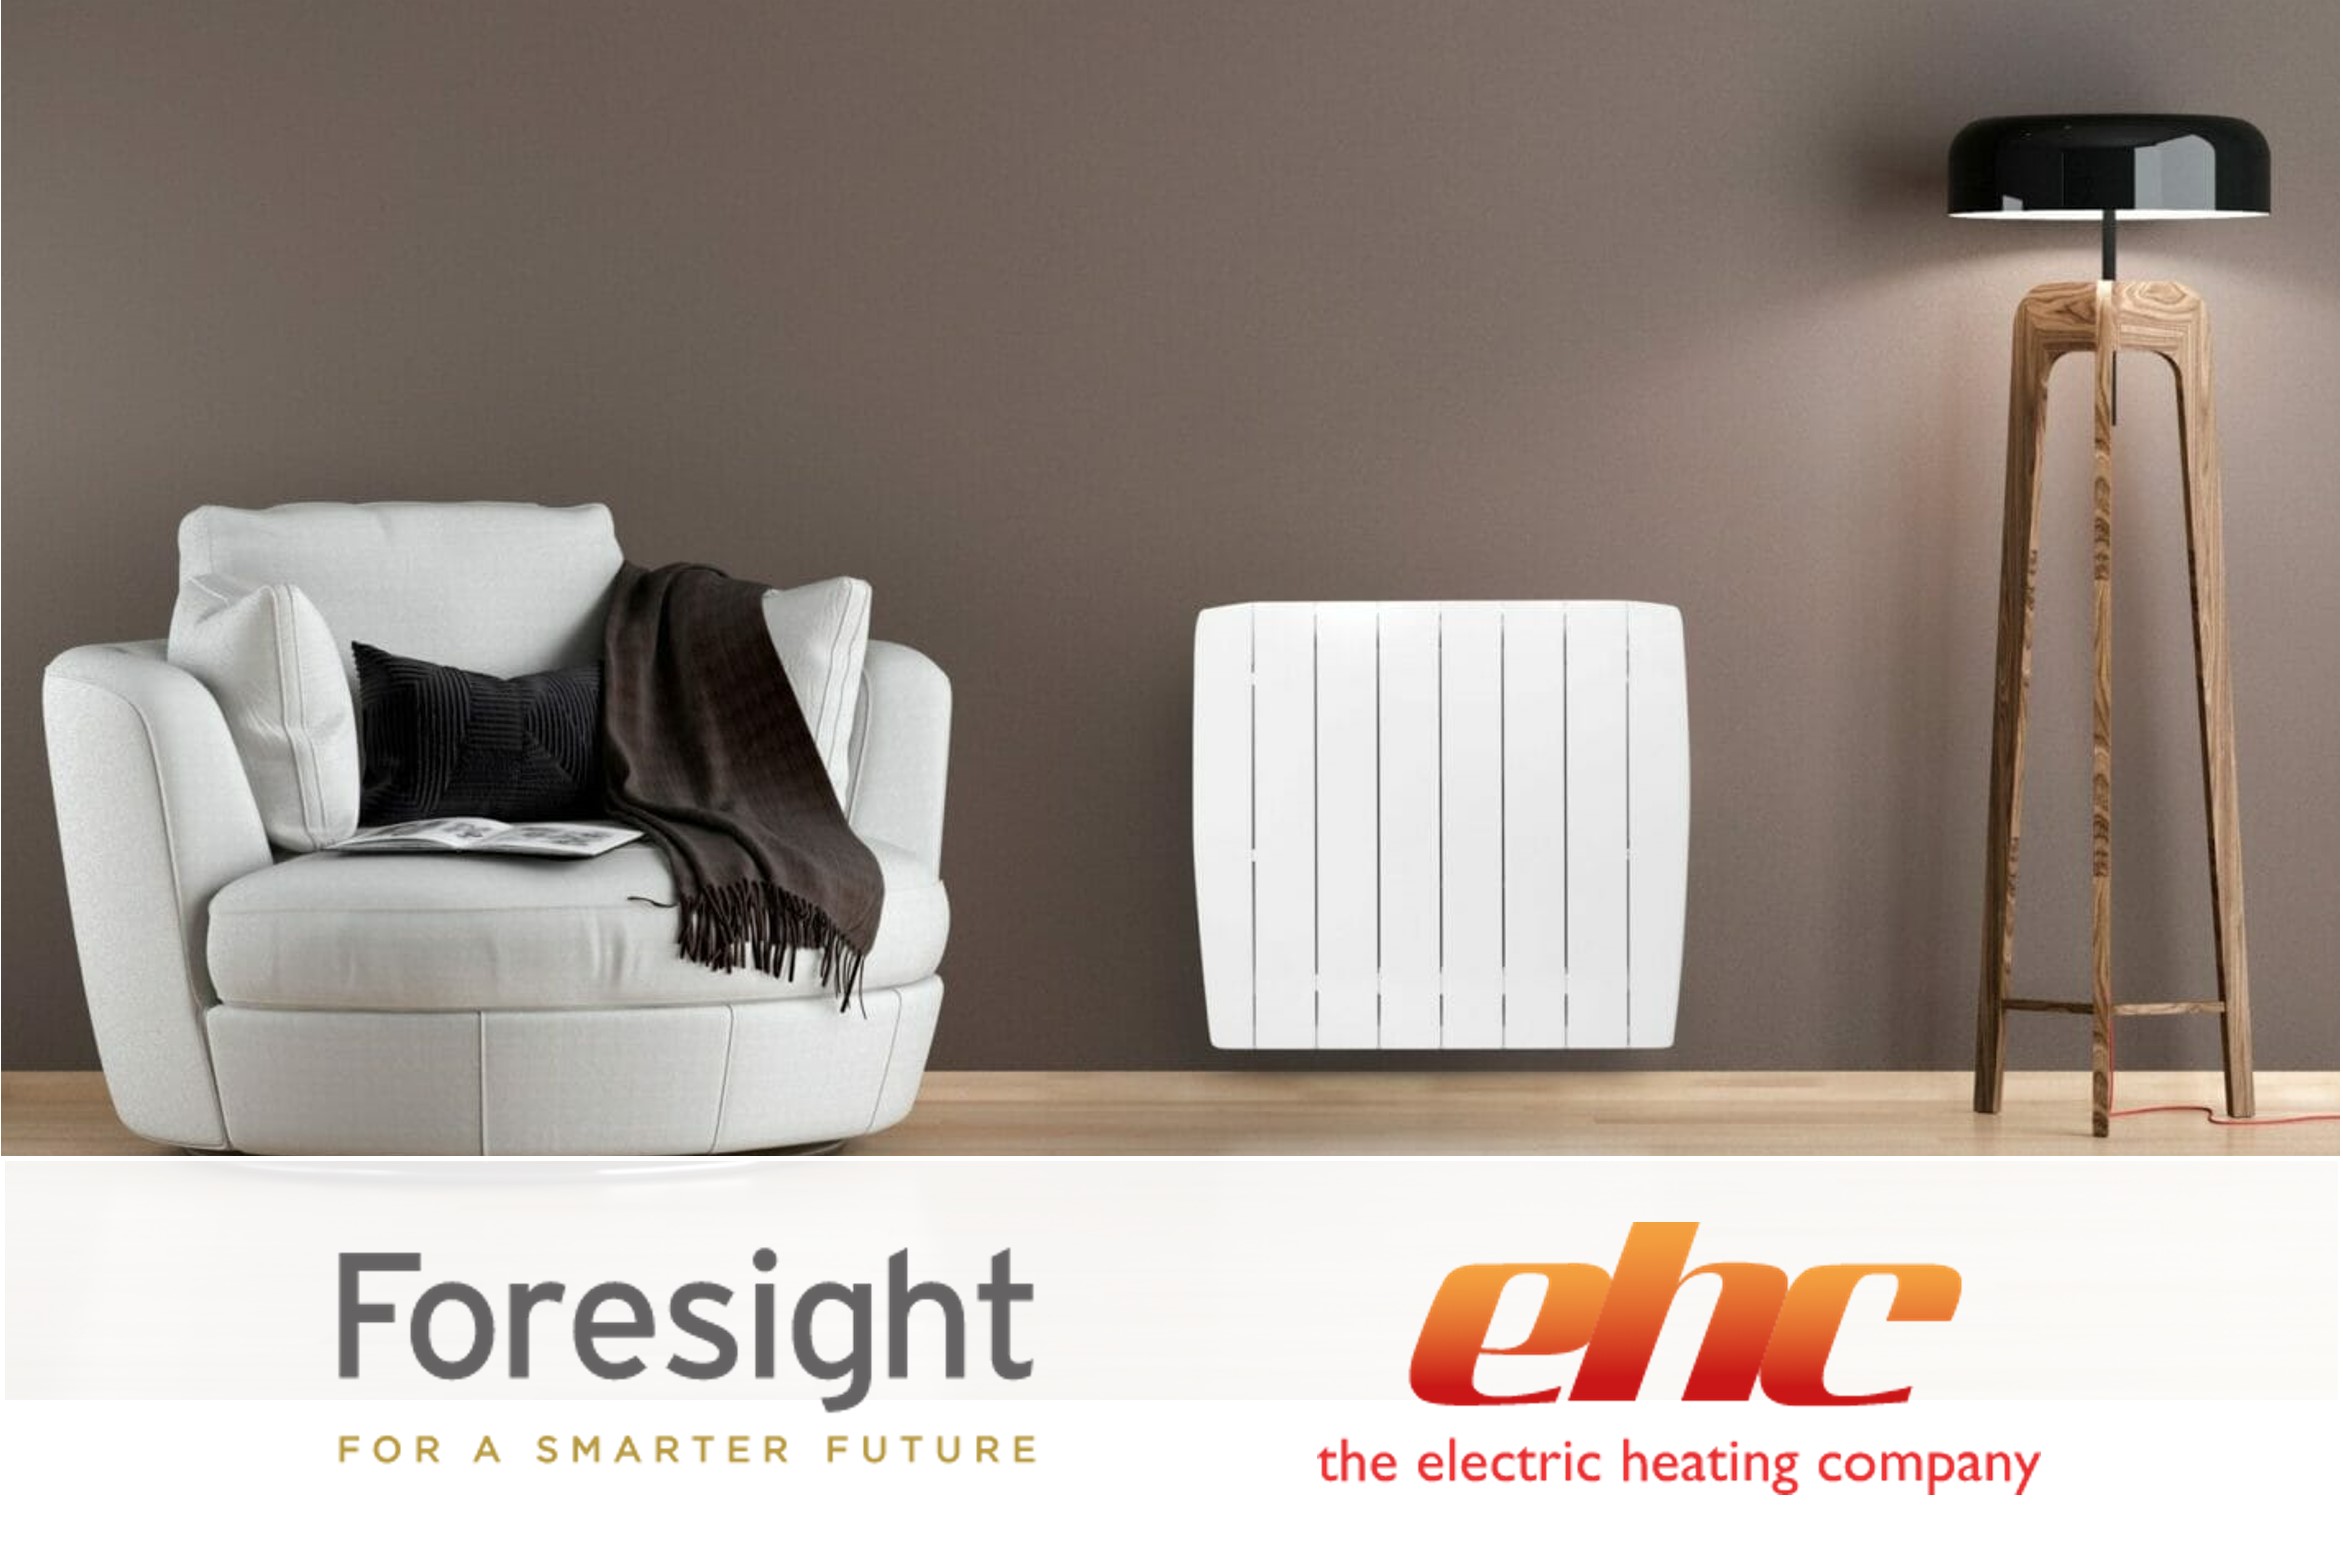 Luminii provides CDD support to Foresight Group on their investment in The Electric Heating Company